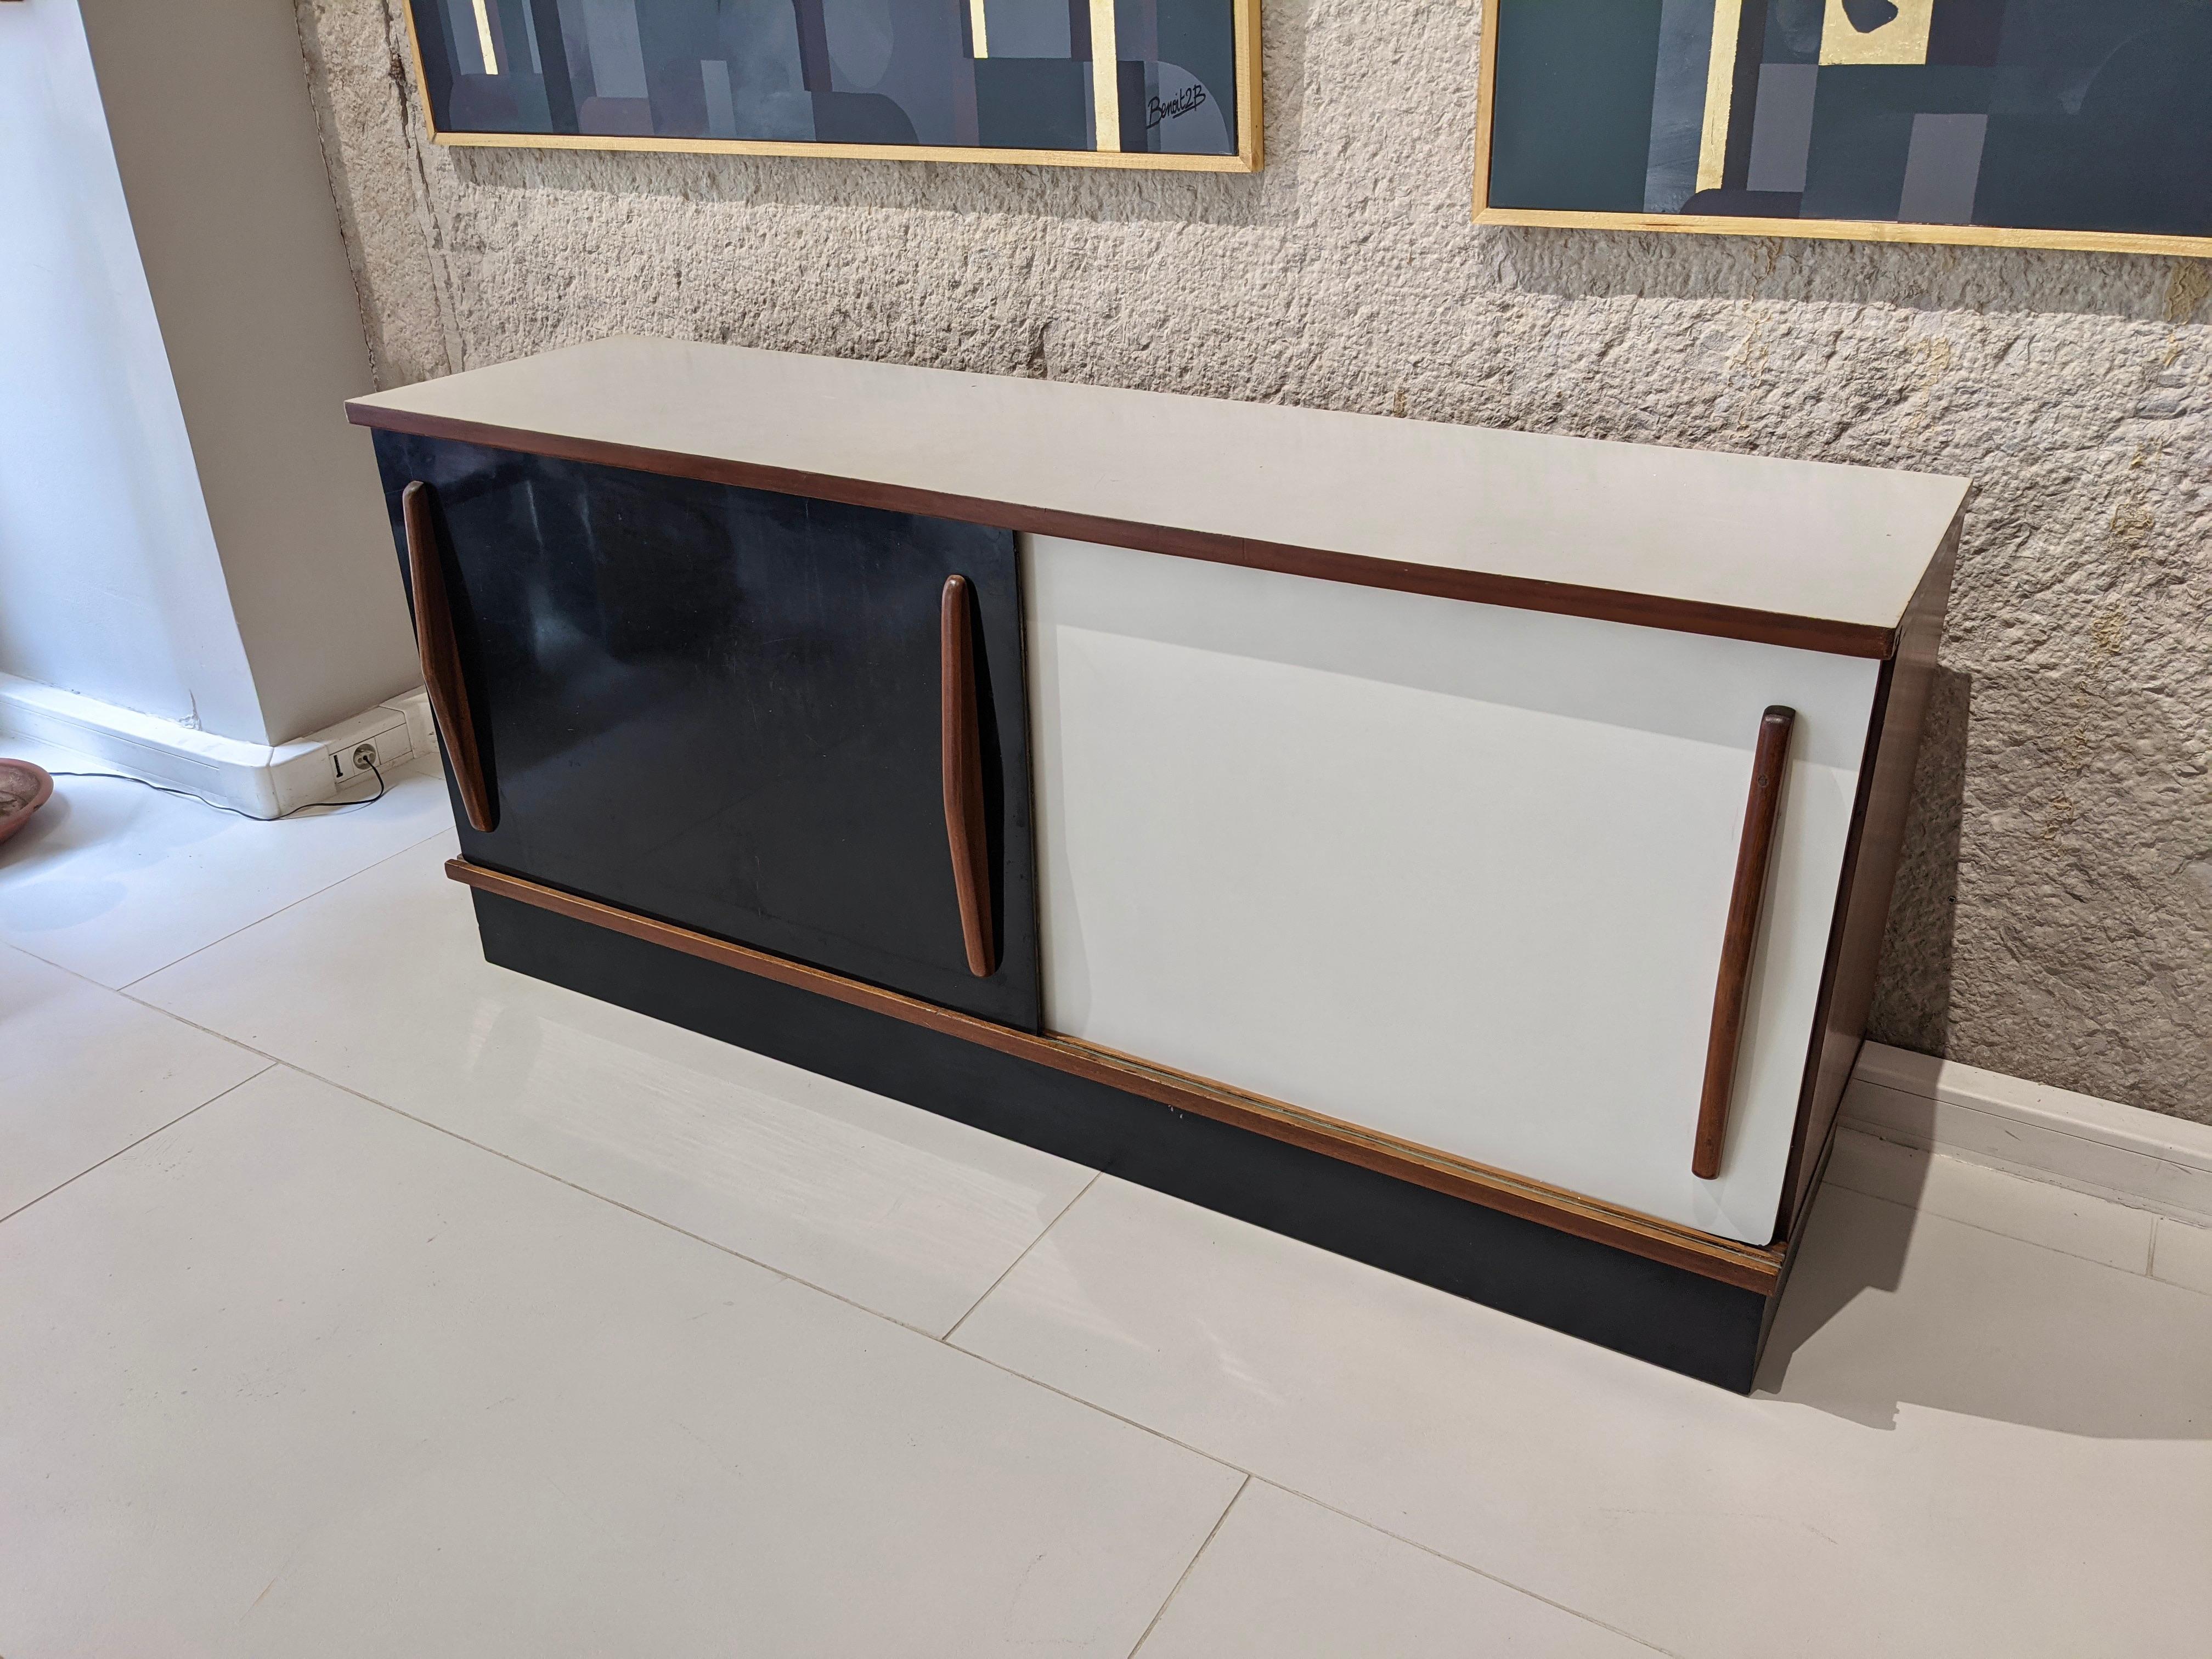 Two-door Cansado sideboard by Charlotte Perriand. Mahogany and melamine white and black. 1954. Steph Simon Edition. Very good condition. 
Origin : Mining town of Cansado, Mauritania, Africa.
Dimensions : H41 cm x W150 cm x D68 cm.